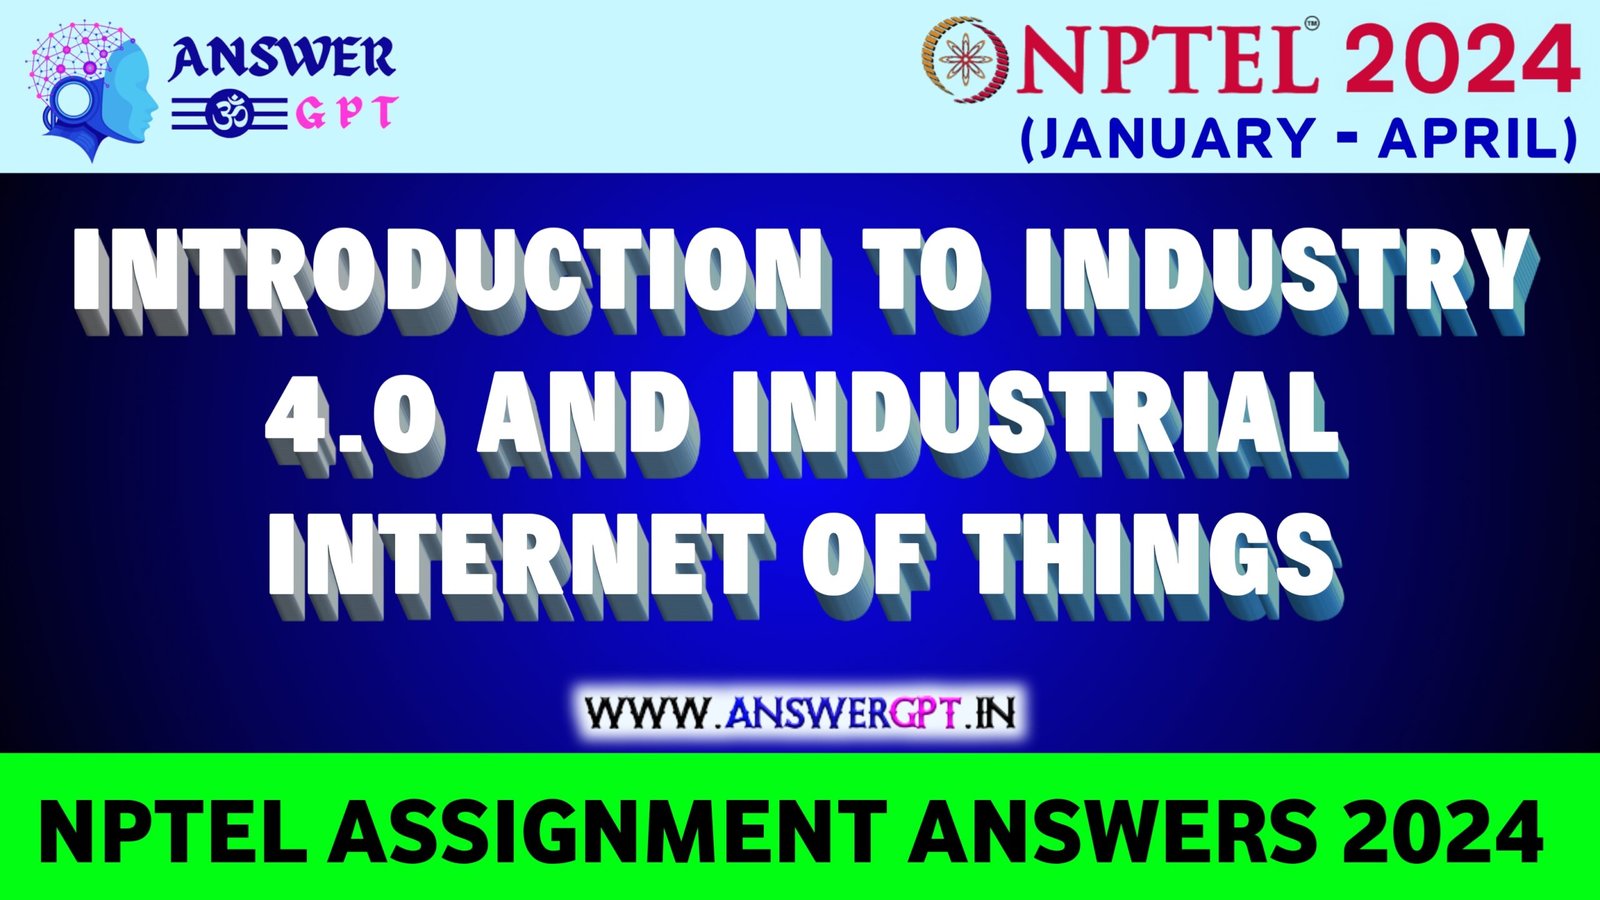 [Week 1-12] NPTEL Introduction To Industry 4.0 And Industrial Internet Of Things Assignment Answers 2024